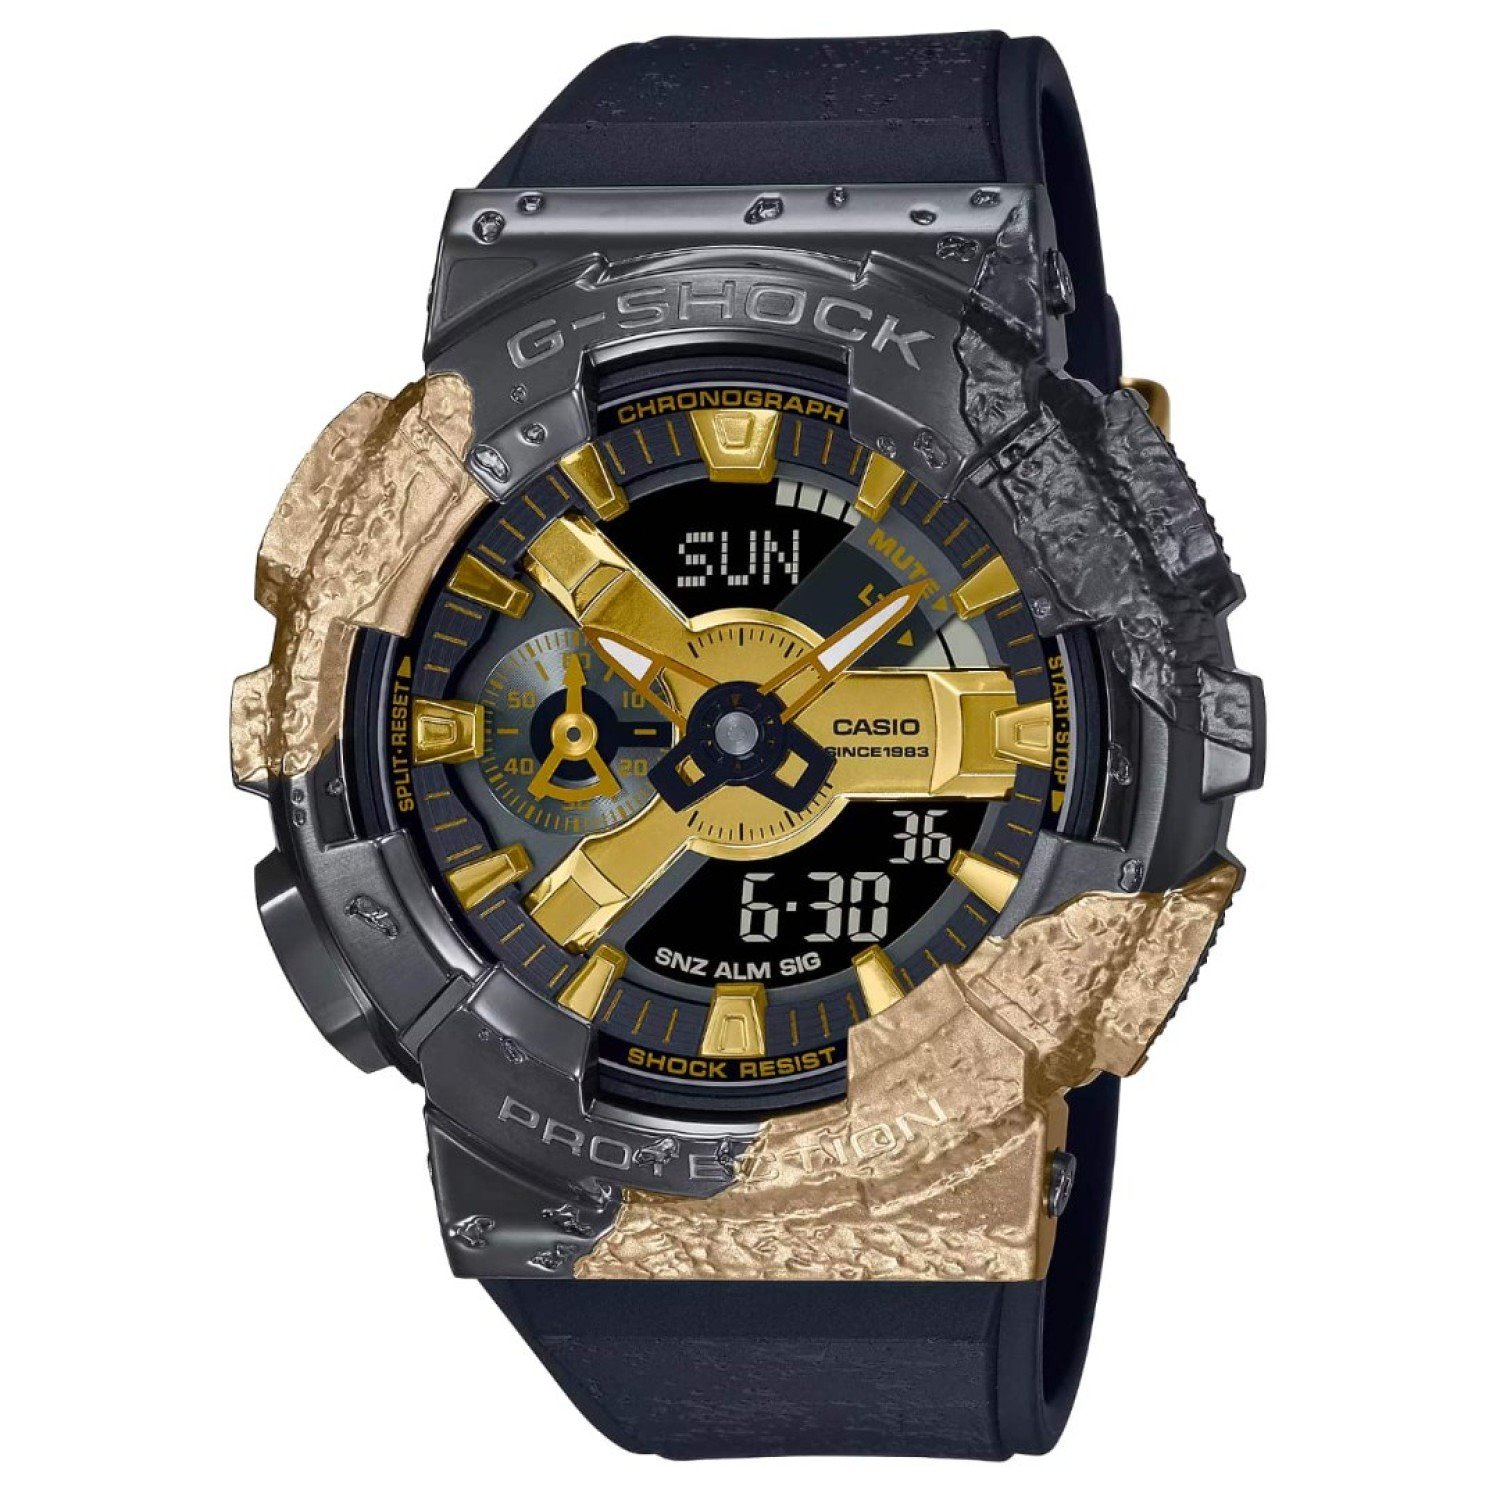 GM-114GEM-1A9 G-SHOCK 40th Anniversary Adventurer’s Stone Series. Chart your own course with a G-SHOCK 40th Anniversary Adventurer’s Stone limited timepiece.